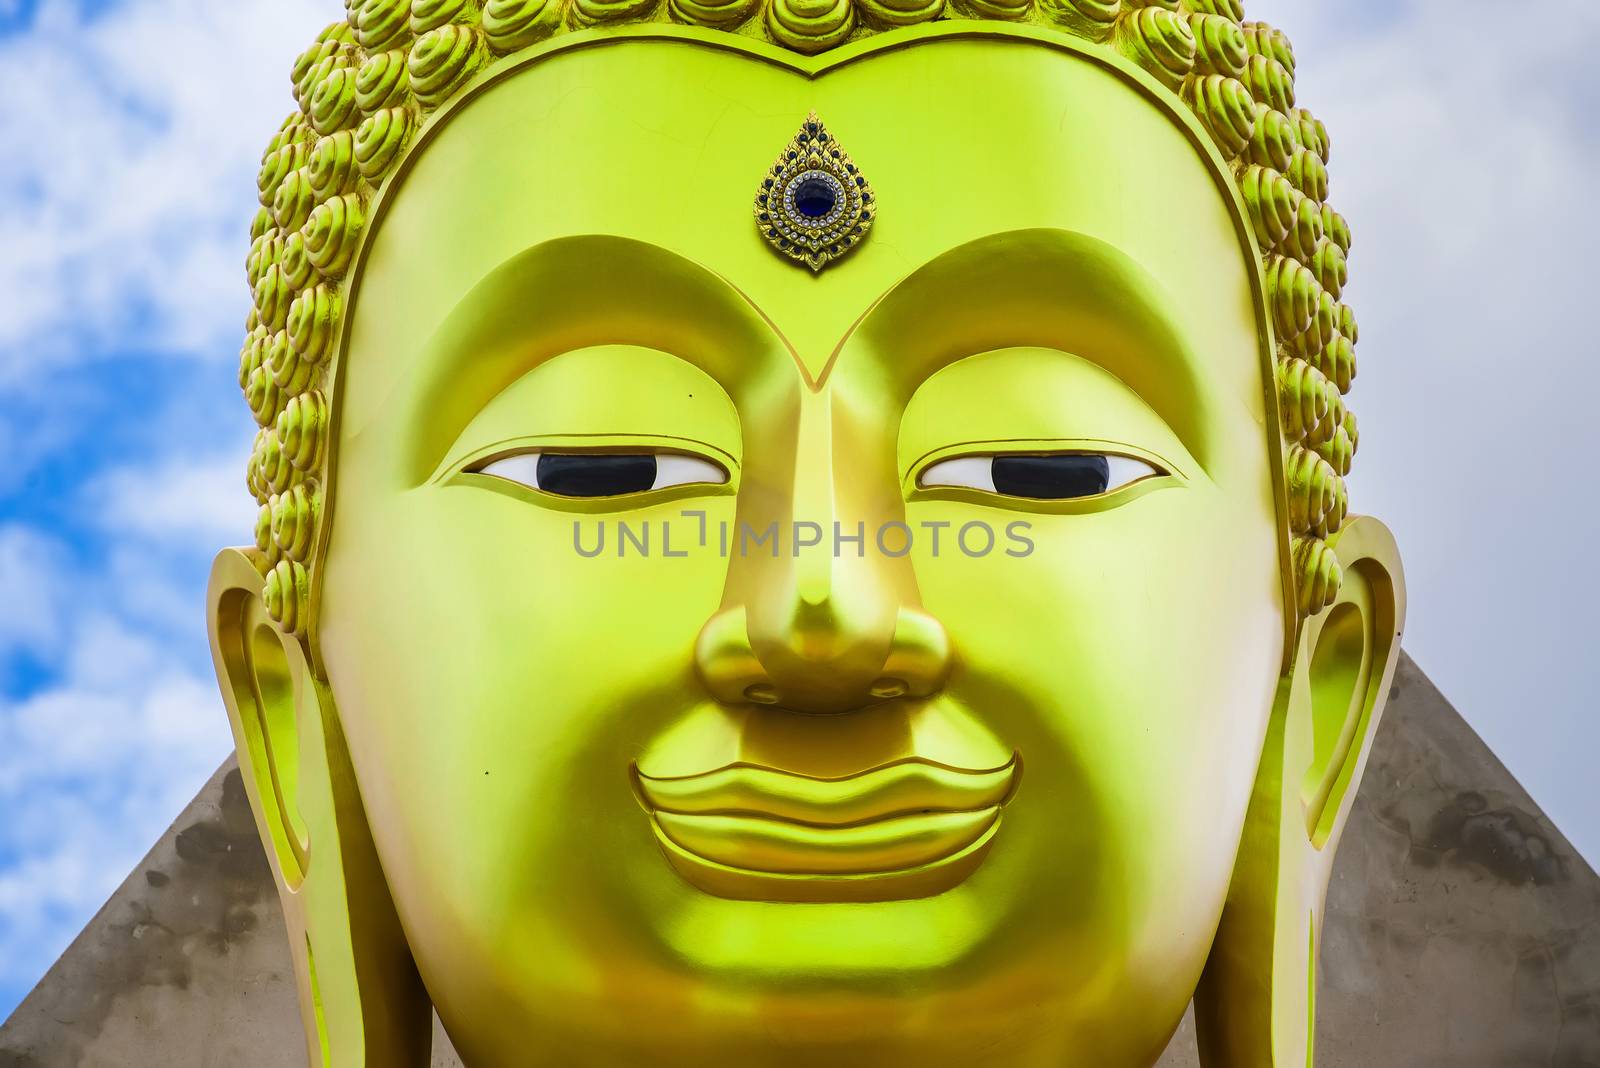 The face of Big Goldden Buddha statue of Chareon Rat Bamrung Tem by Bubbers